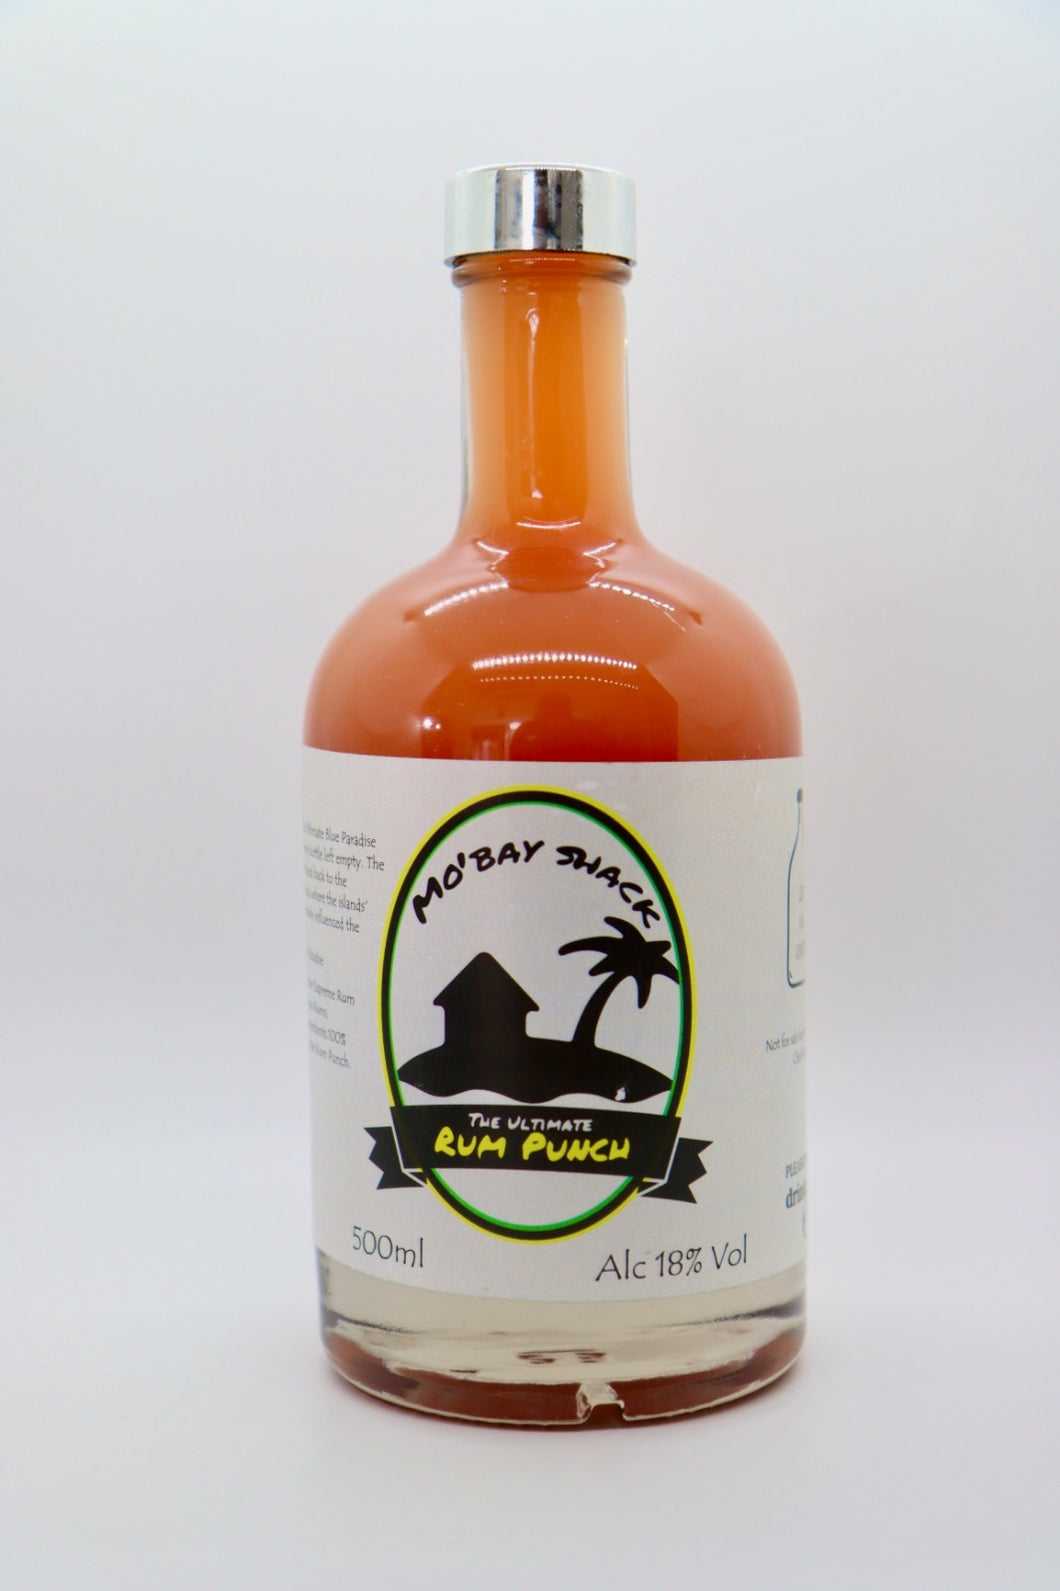 Mo'Bay Shack  - The Ultimate Rum Punch  - 500ML Polo Bottle